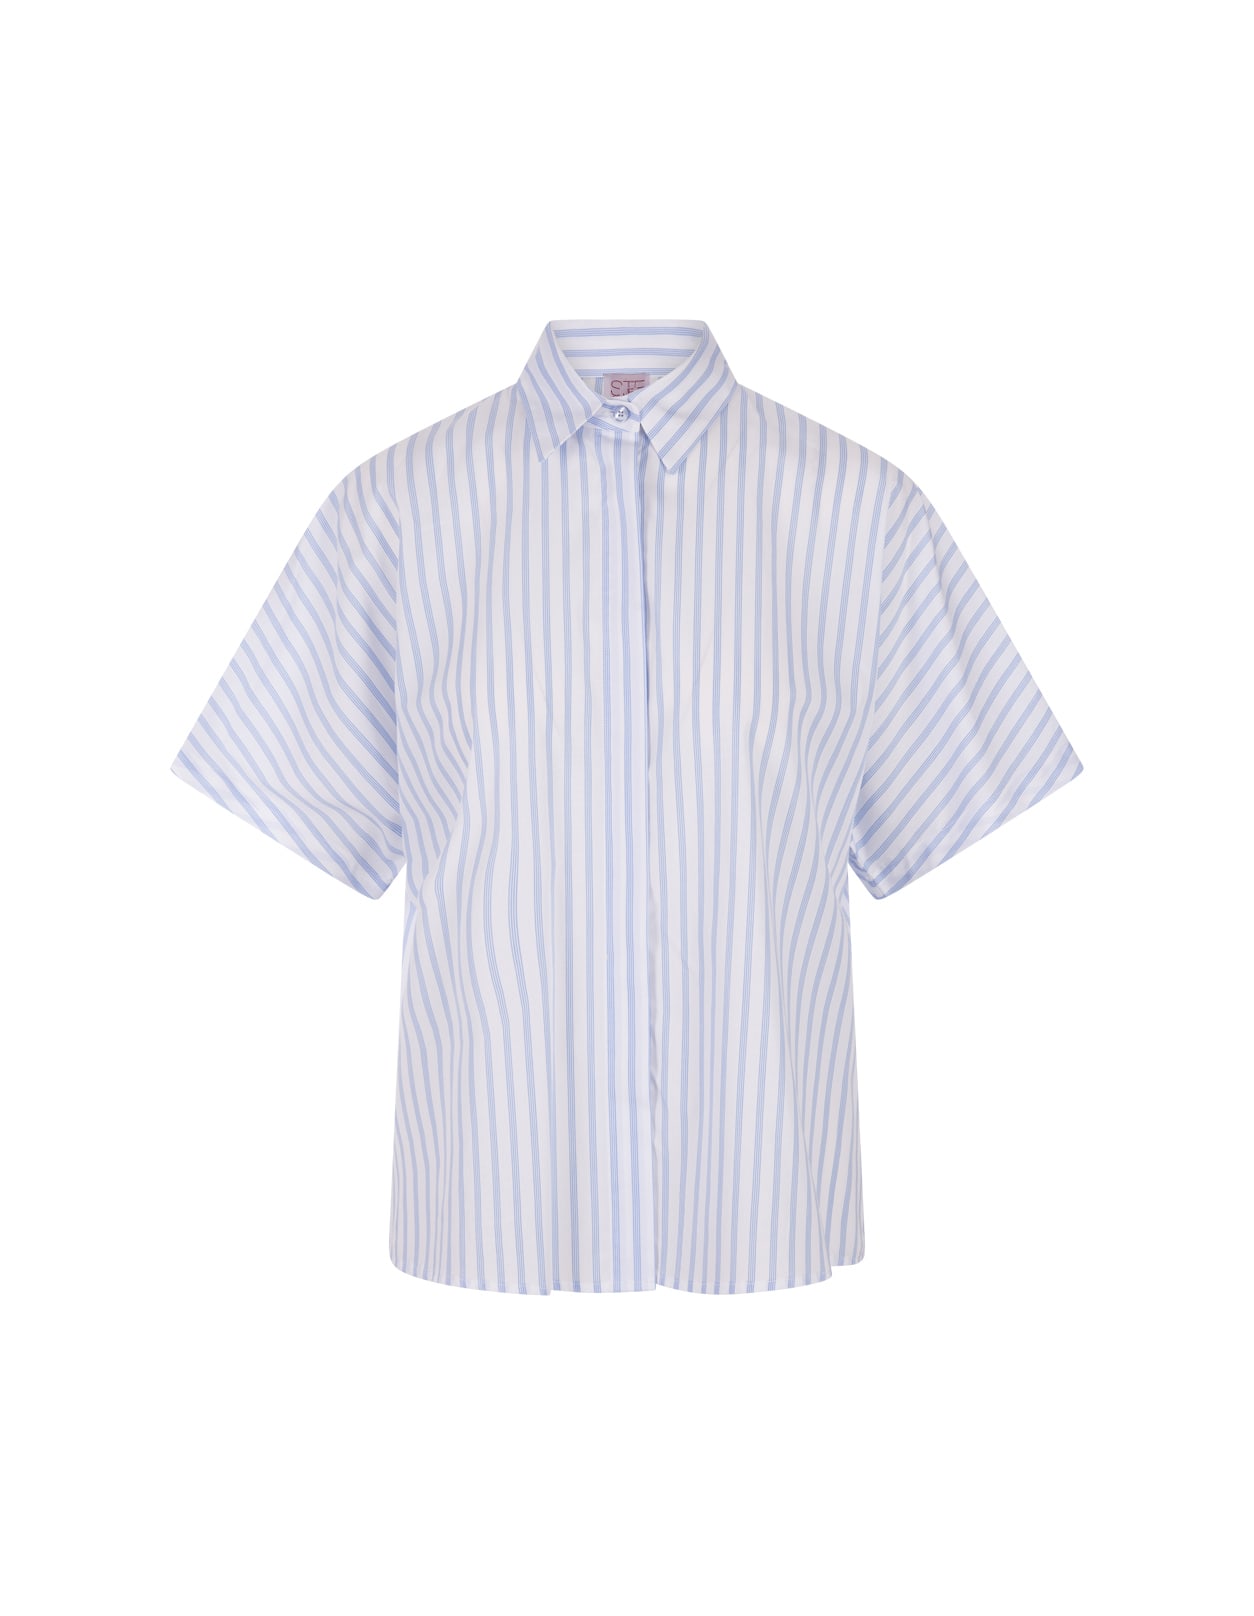 White And Blue Striped Shirt With Short Sleeves